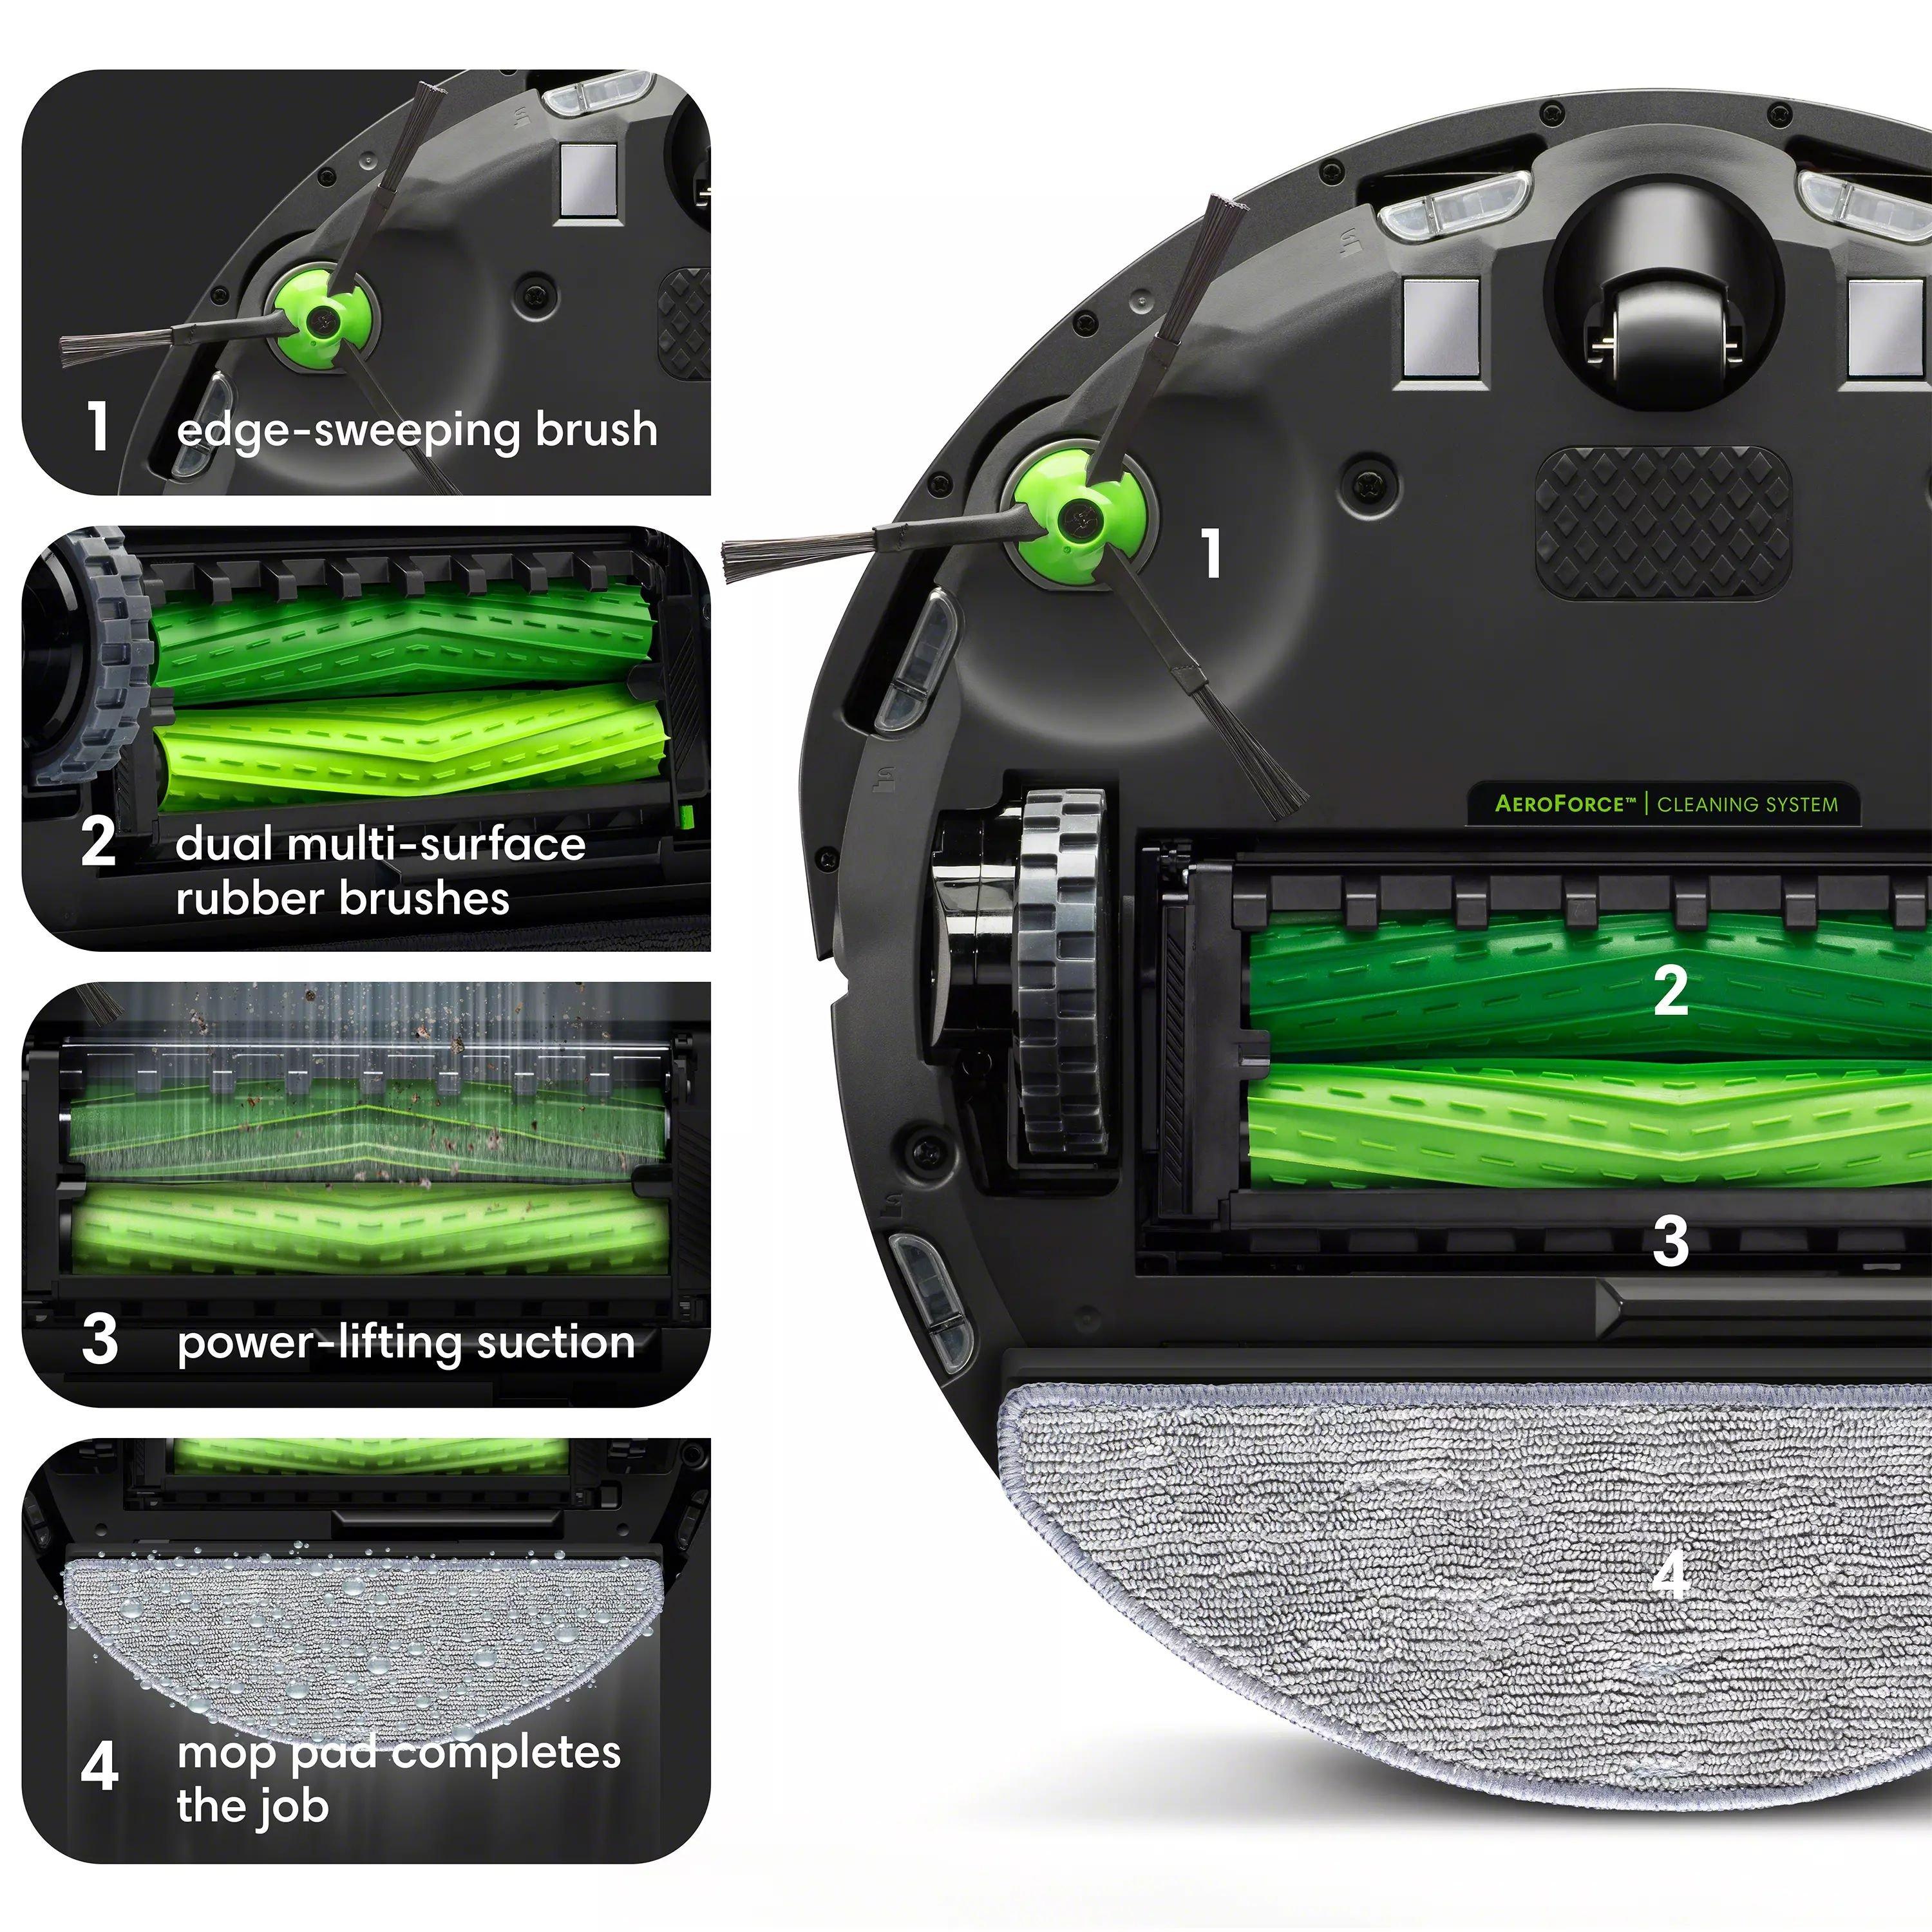 iRobot's Roomba j5 vacuum and mop combo machines are up to $200 off